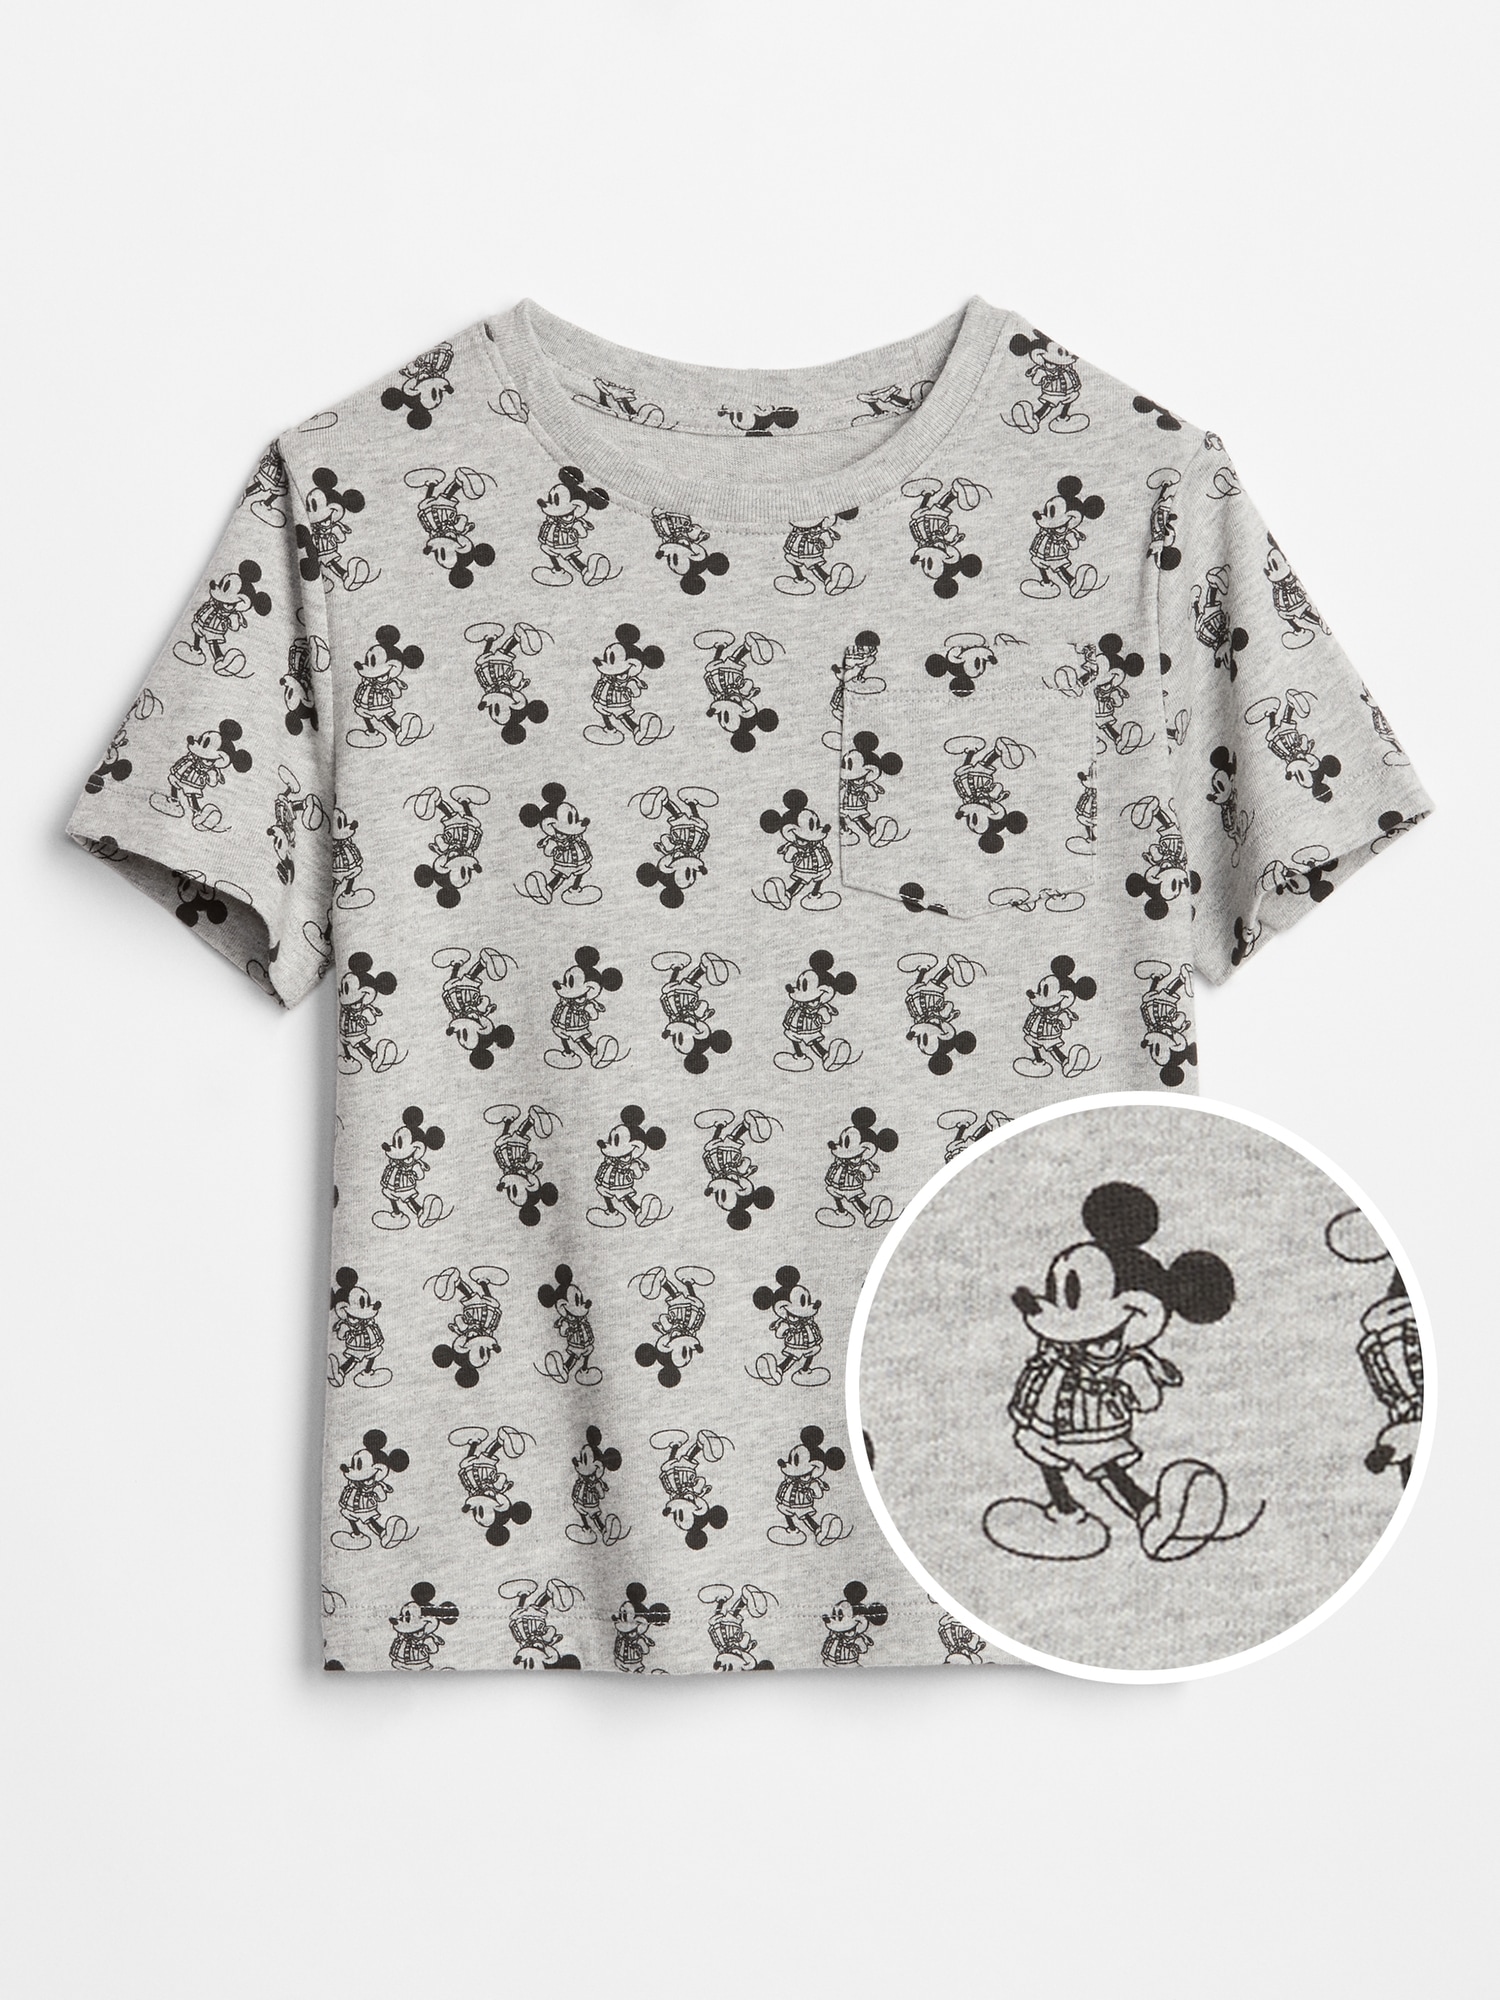 Baby Gap Mickey Mouse Cheaper Than Retail Price Buy Clothing Accessories And Lifestyle Products For Women Men